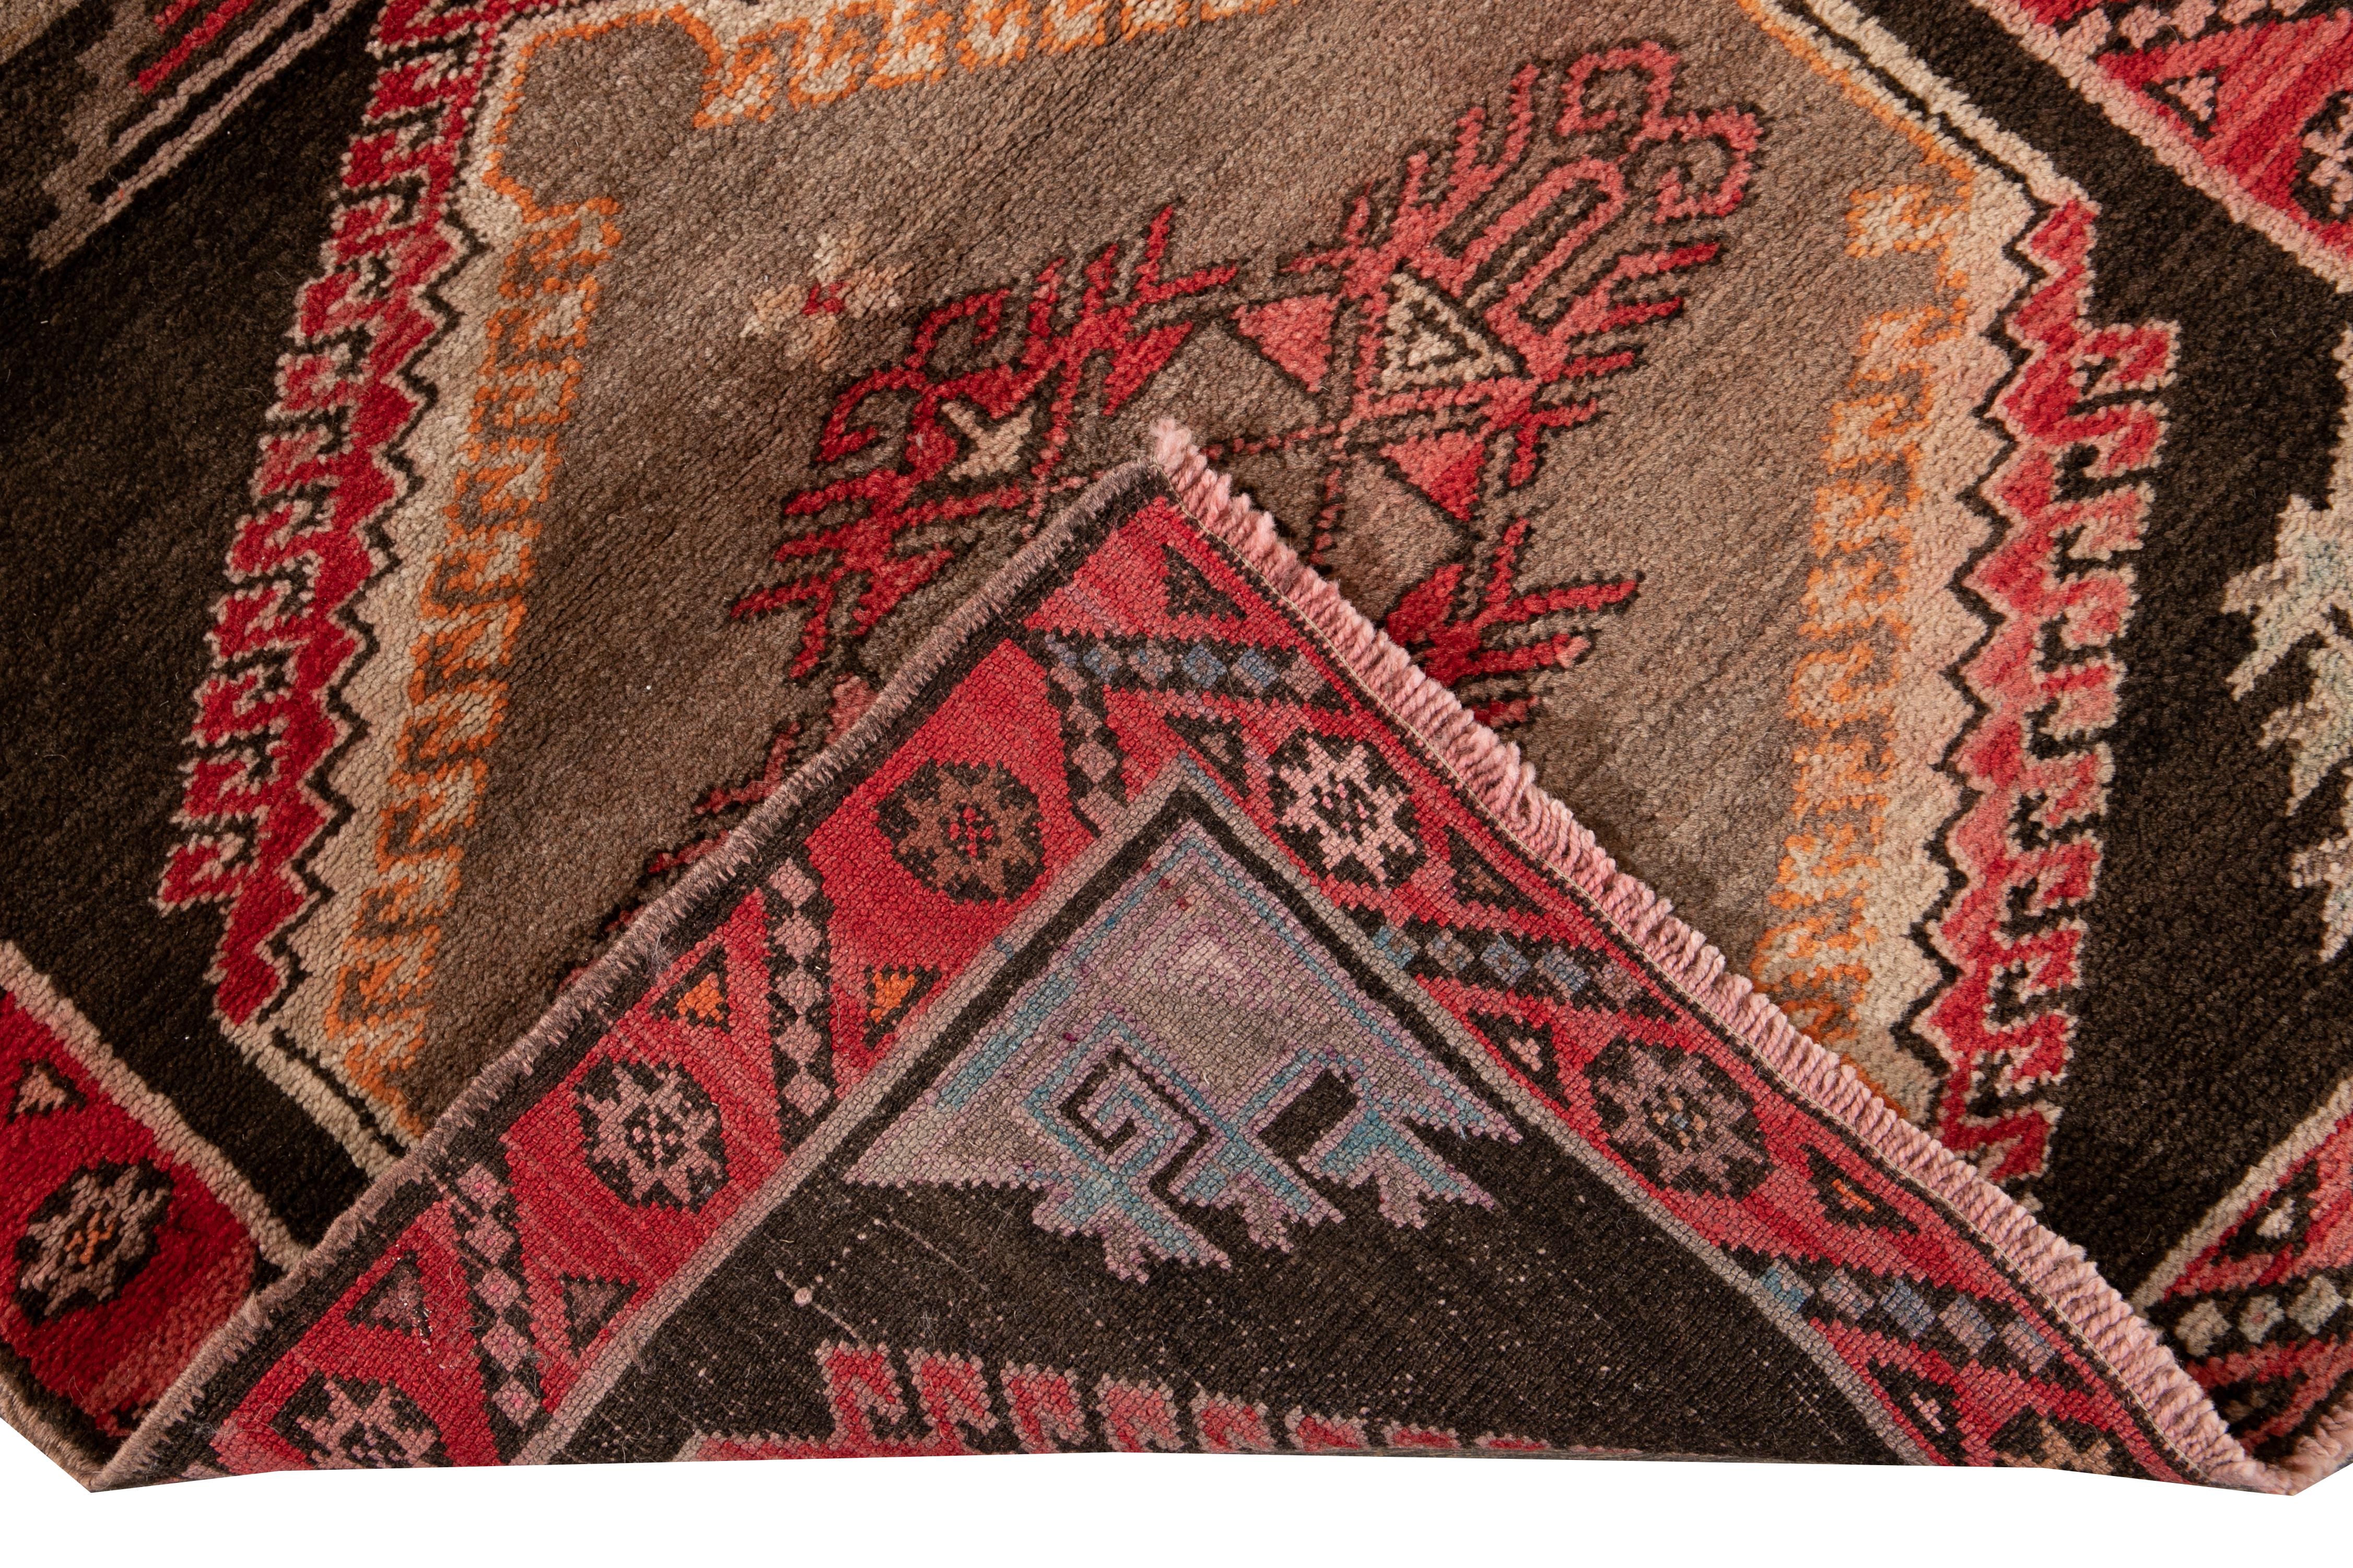 Beautiful Vintage pictorial Turkish hand knotted wool rug with a brown field. This Turkish rug has a red frame, and accents of orange and beige in a gorgeous all-over geometric pictorial design.

This rug measures 3' 3